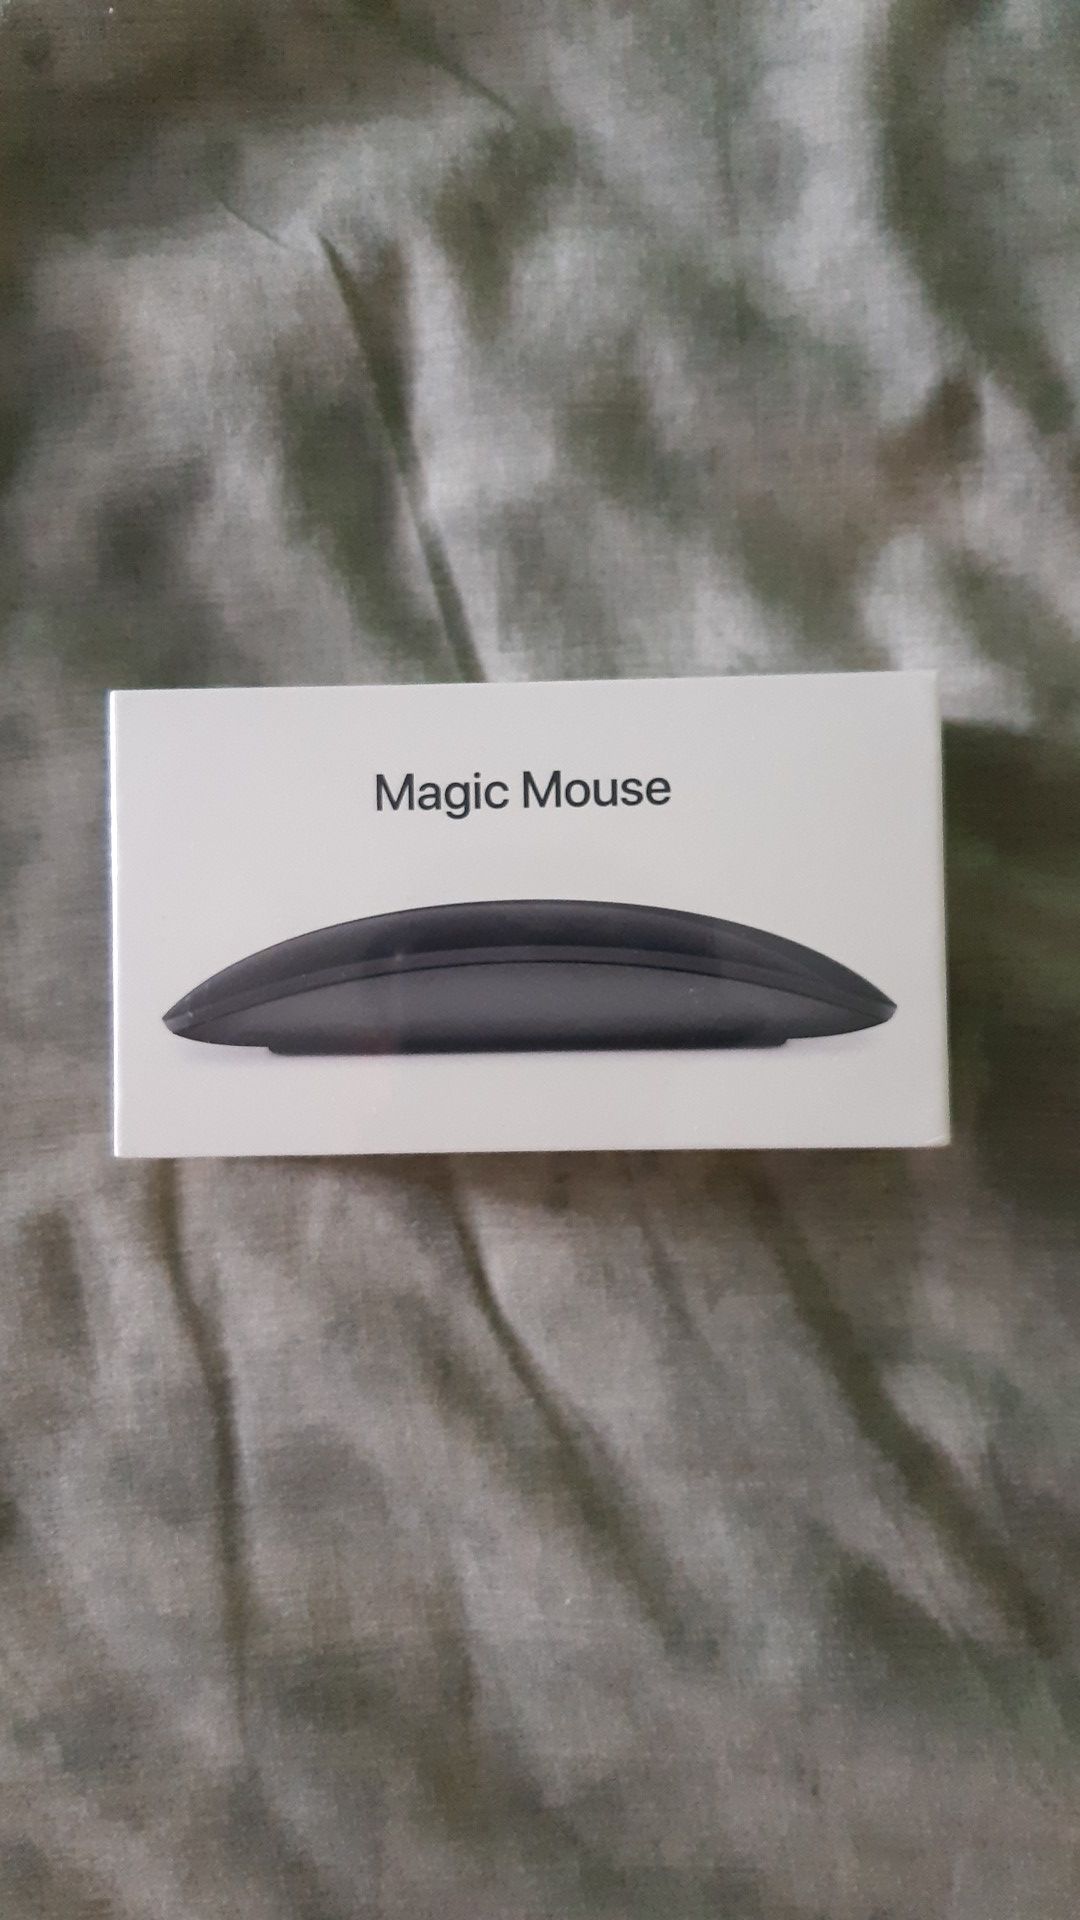 Apple magic trackpad and mouse. 2nd gen